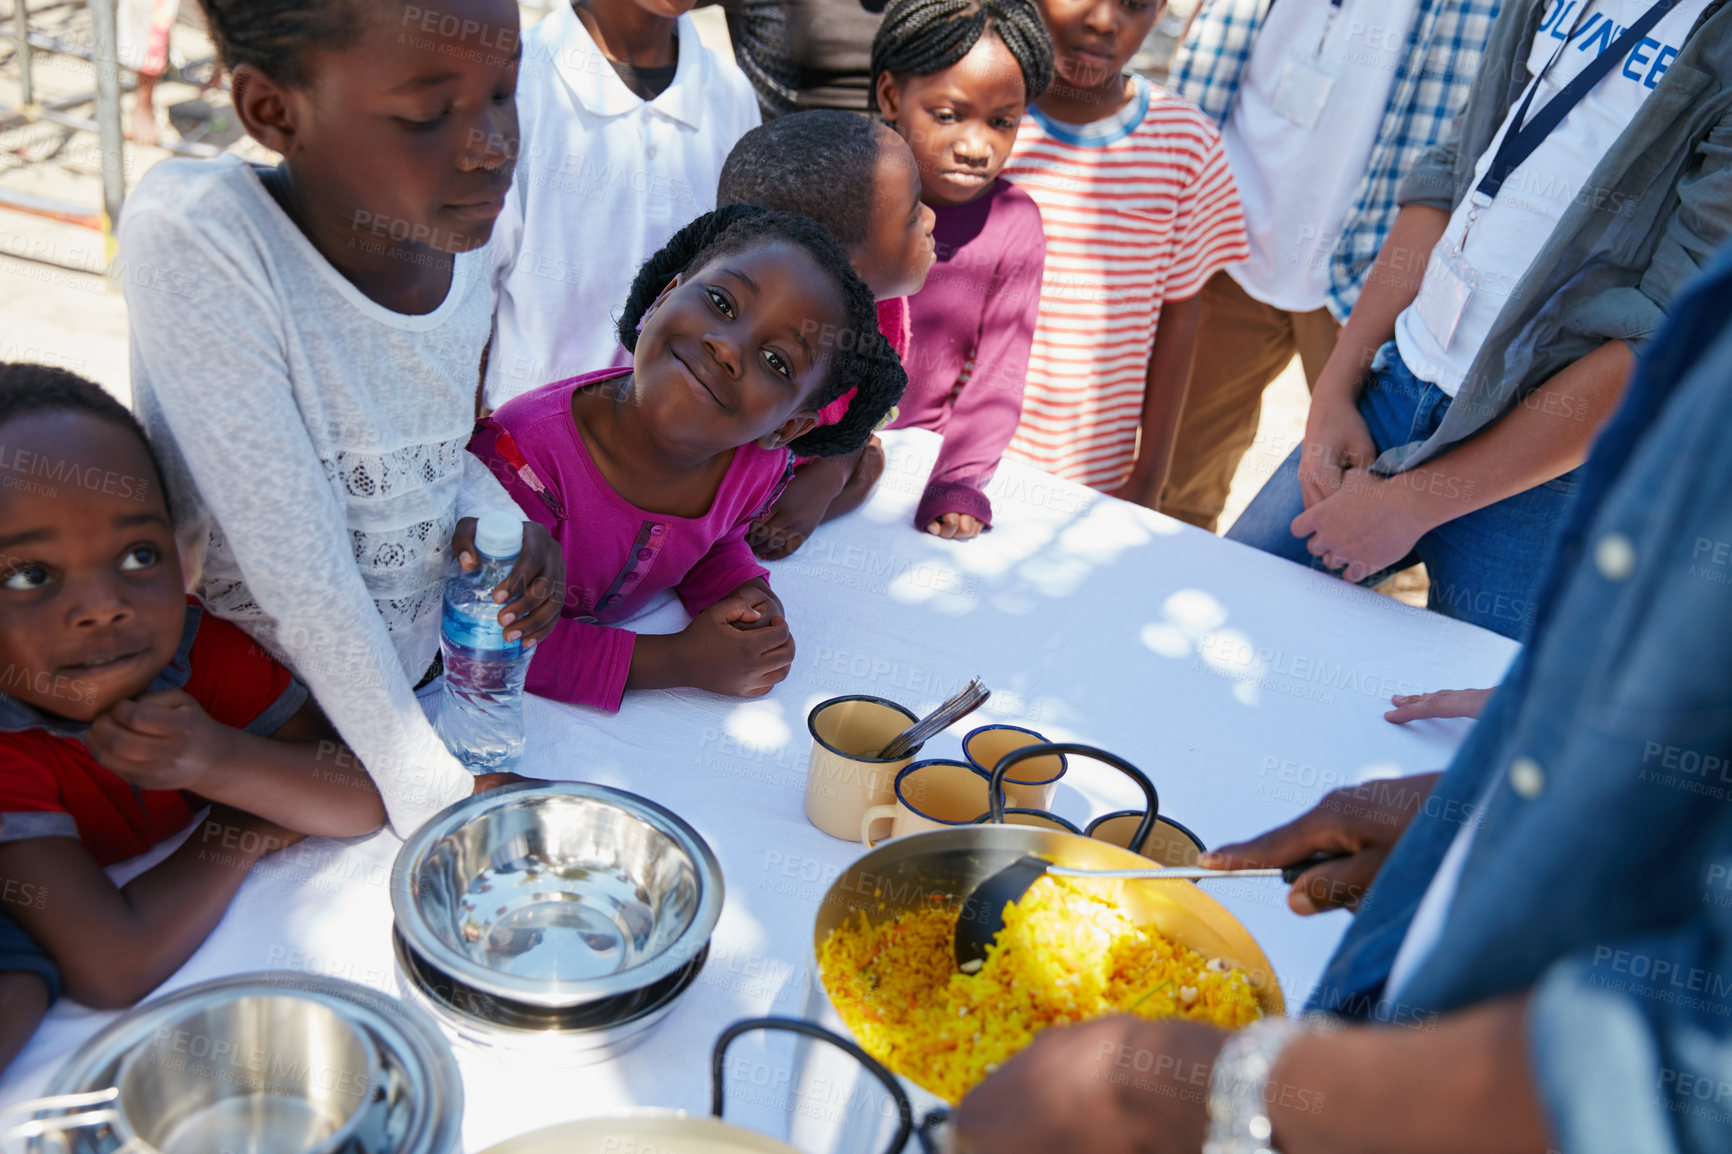 Buy stock photo Cropped portrait of children getting fed at a food outreach